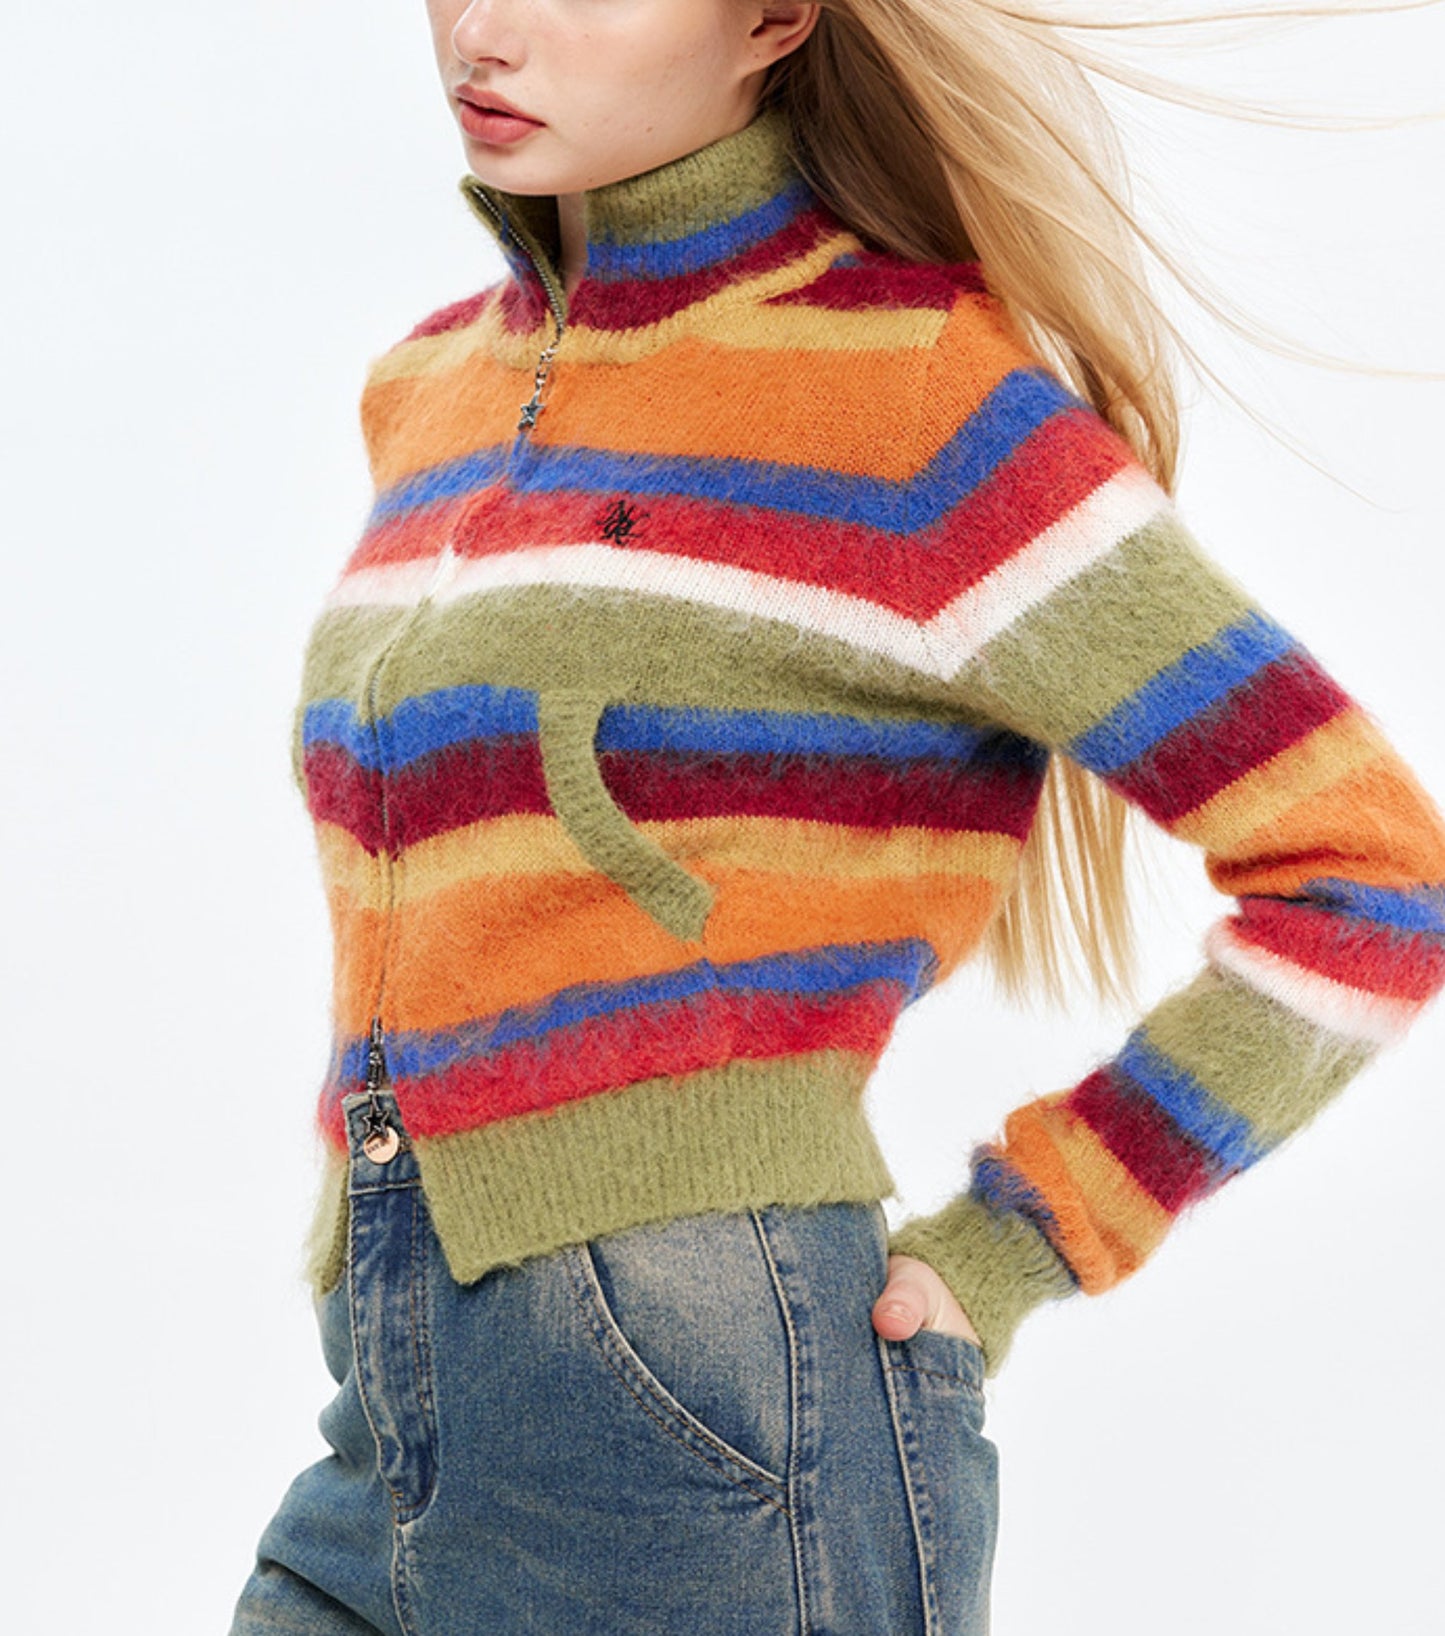 3 Colors Colorful Striped Half Turtleneck Zipper Cardigan Knitted Short Sweater